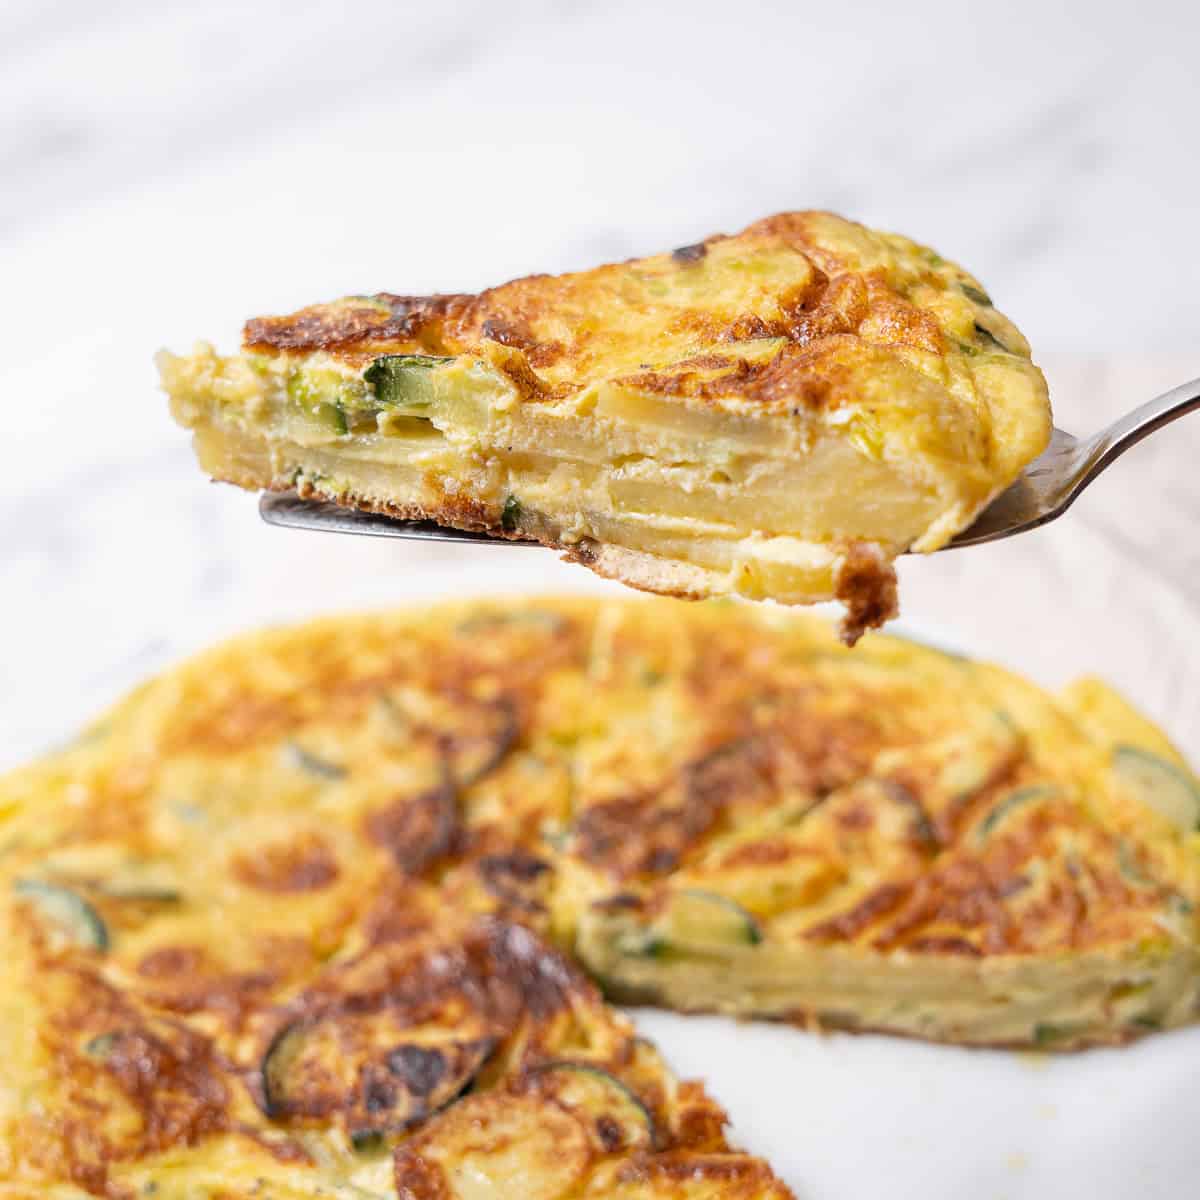 holding a slice of Spanish tortilla with zucchini.